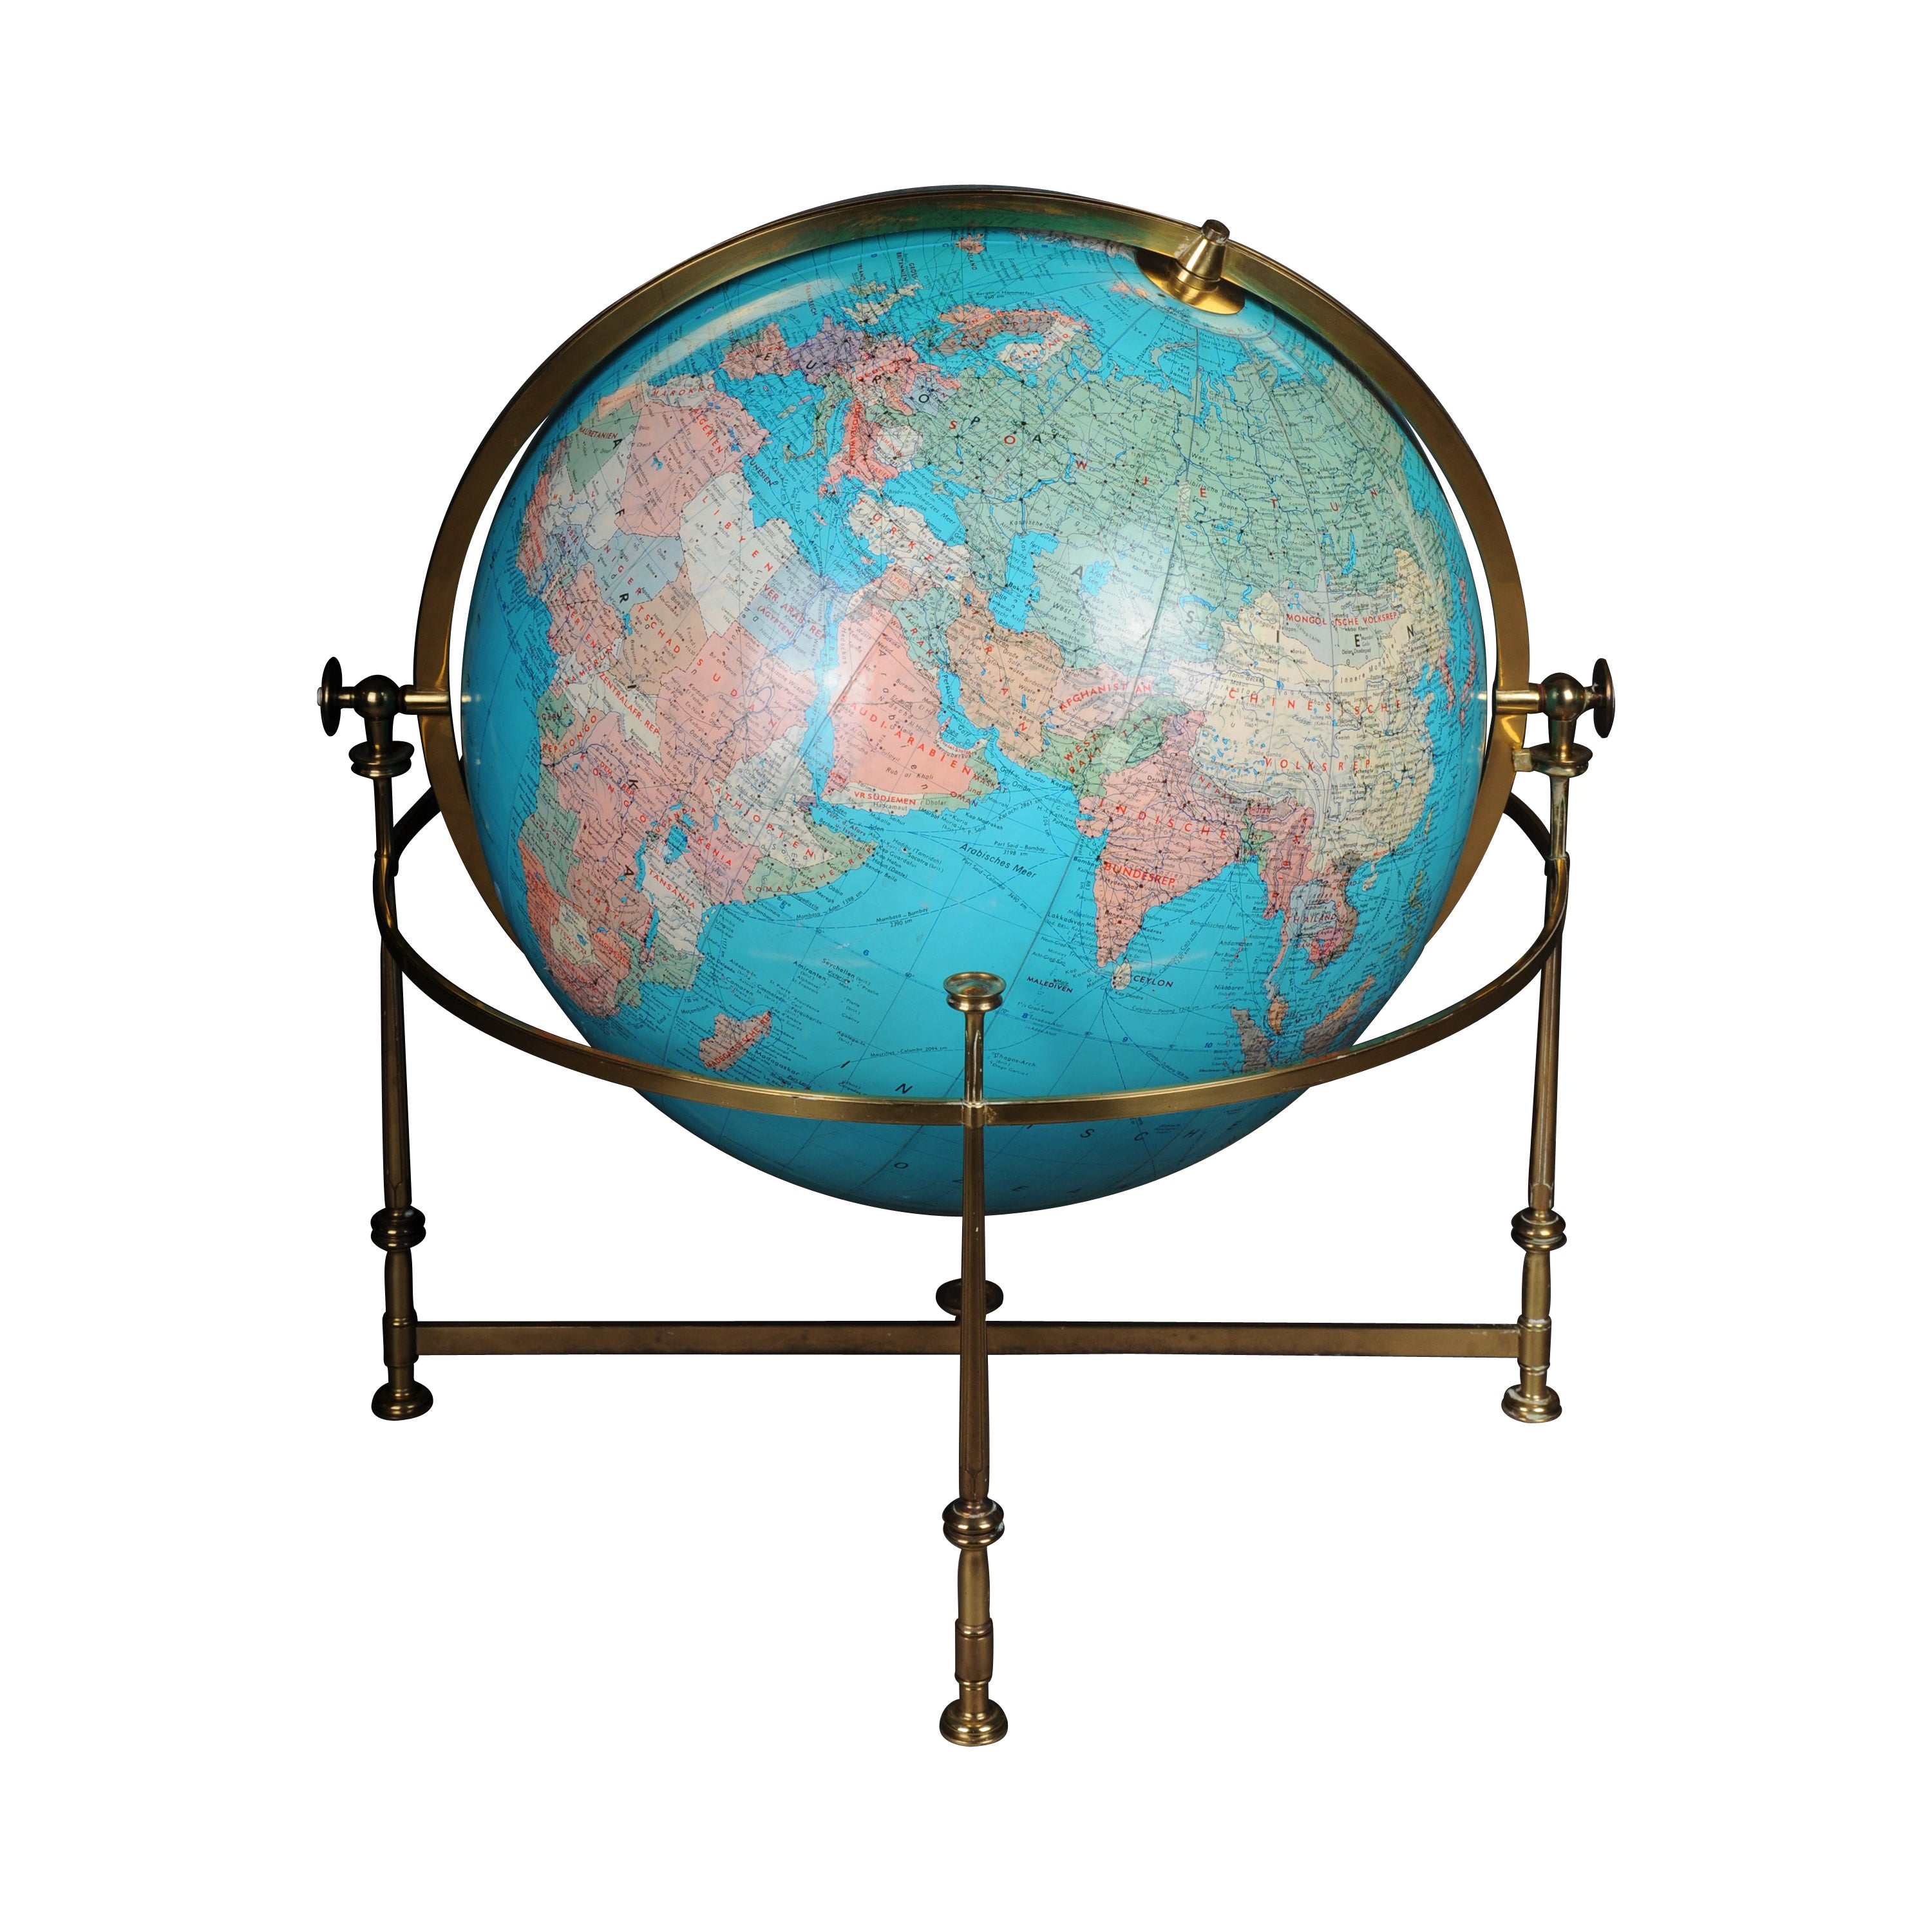 XXL Globe with Lighting from the Publishing House JRO Munich from the 1960s